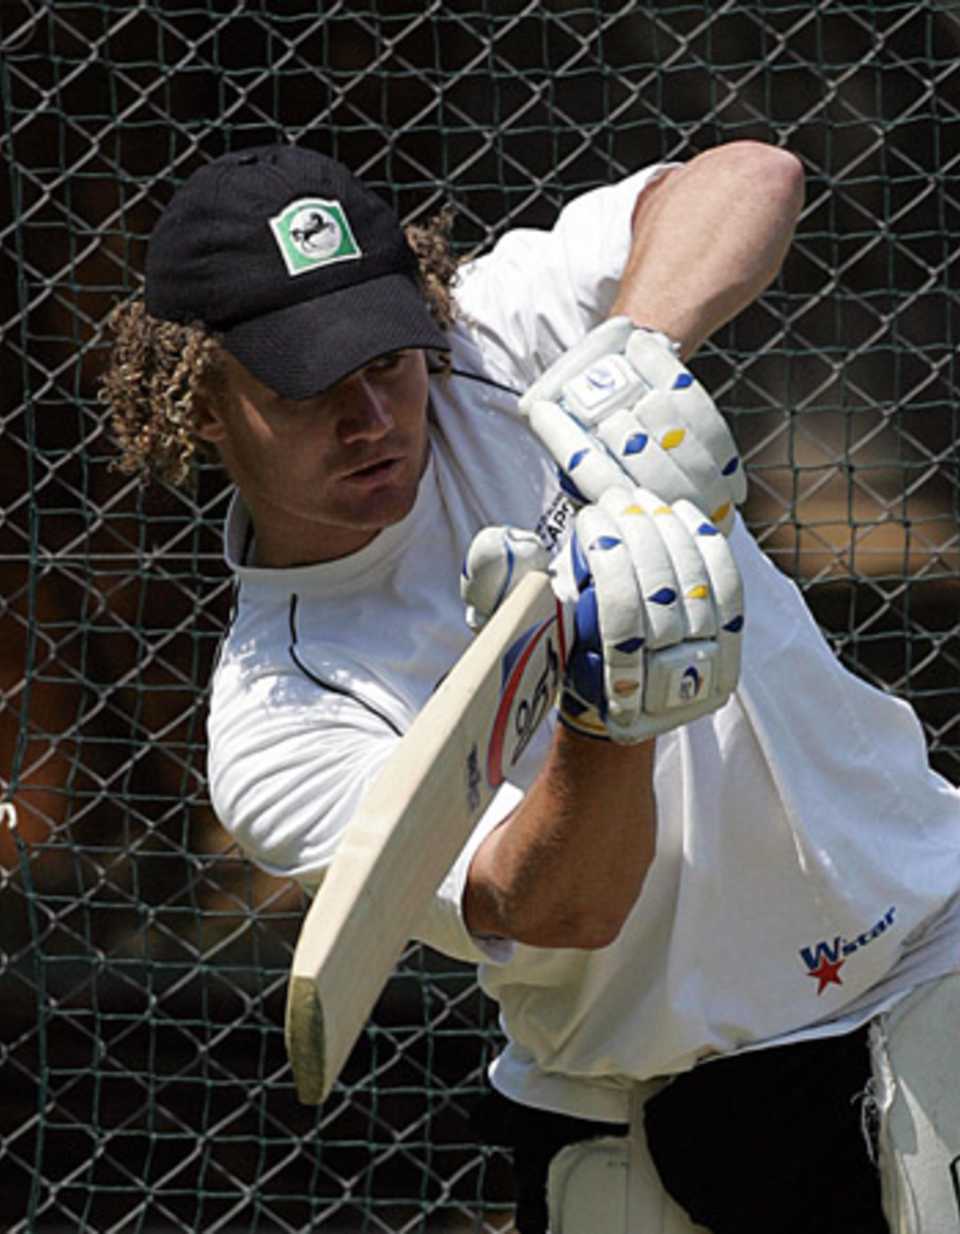 Hamish Marshall punches one down the ground during a net session at Harare, September 5, 2005